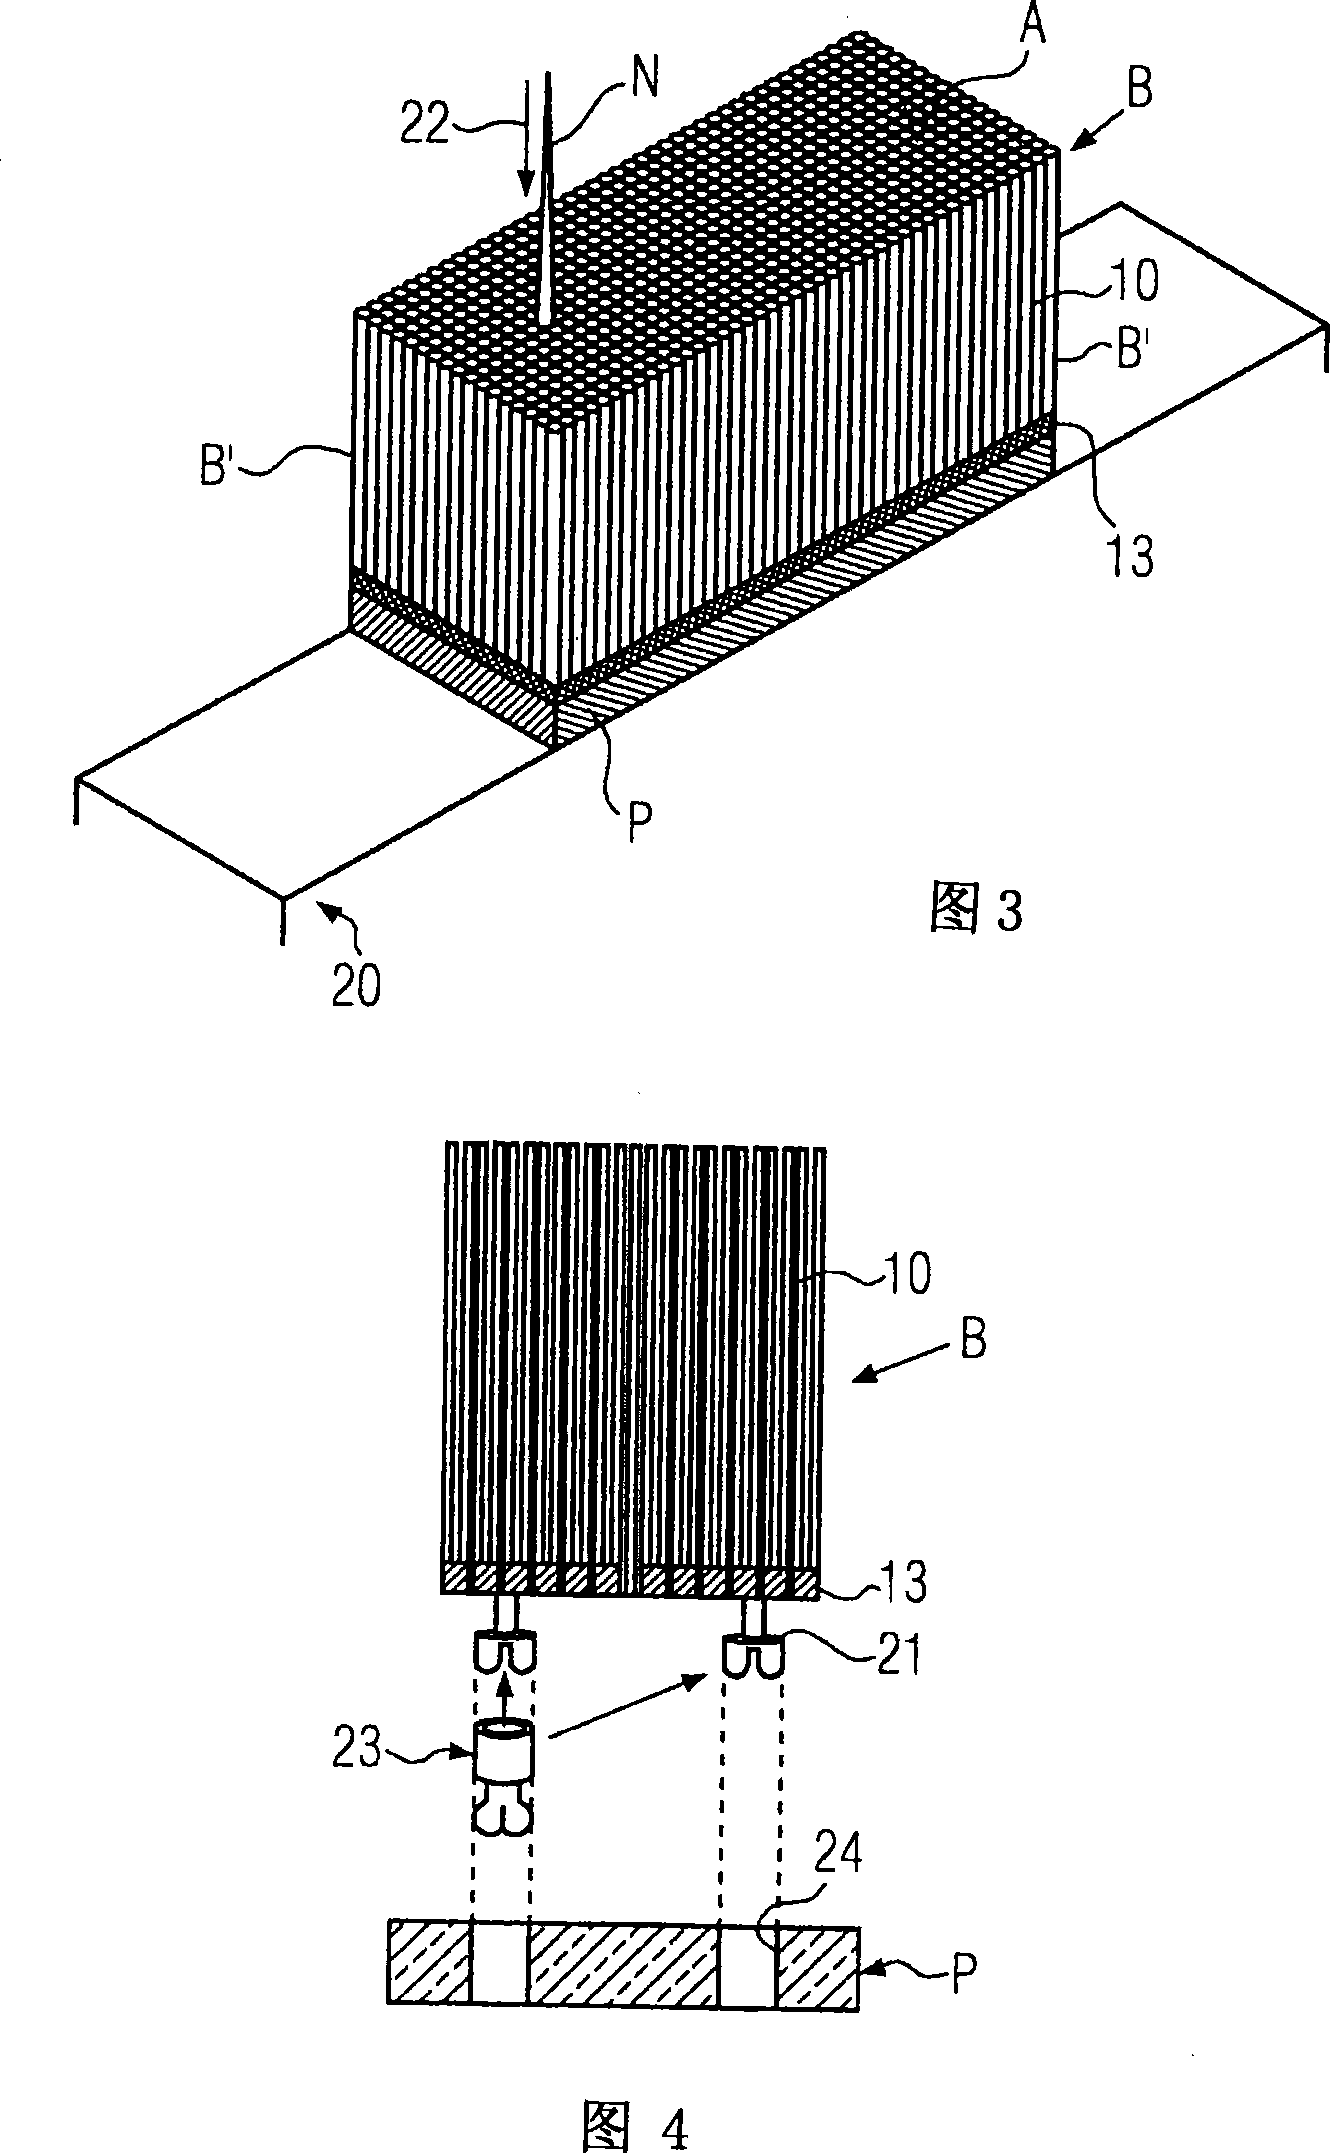 Method and apparatus for pattern cutting